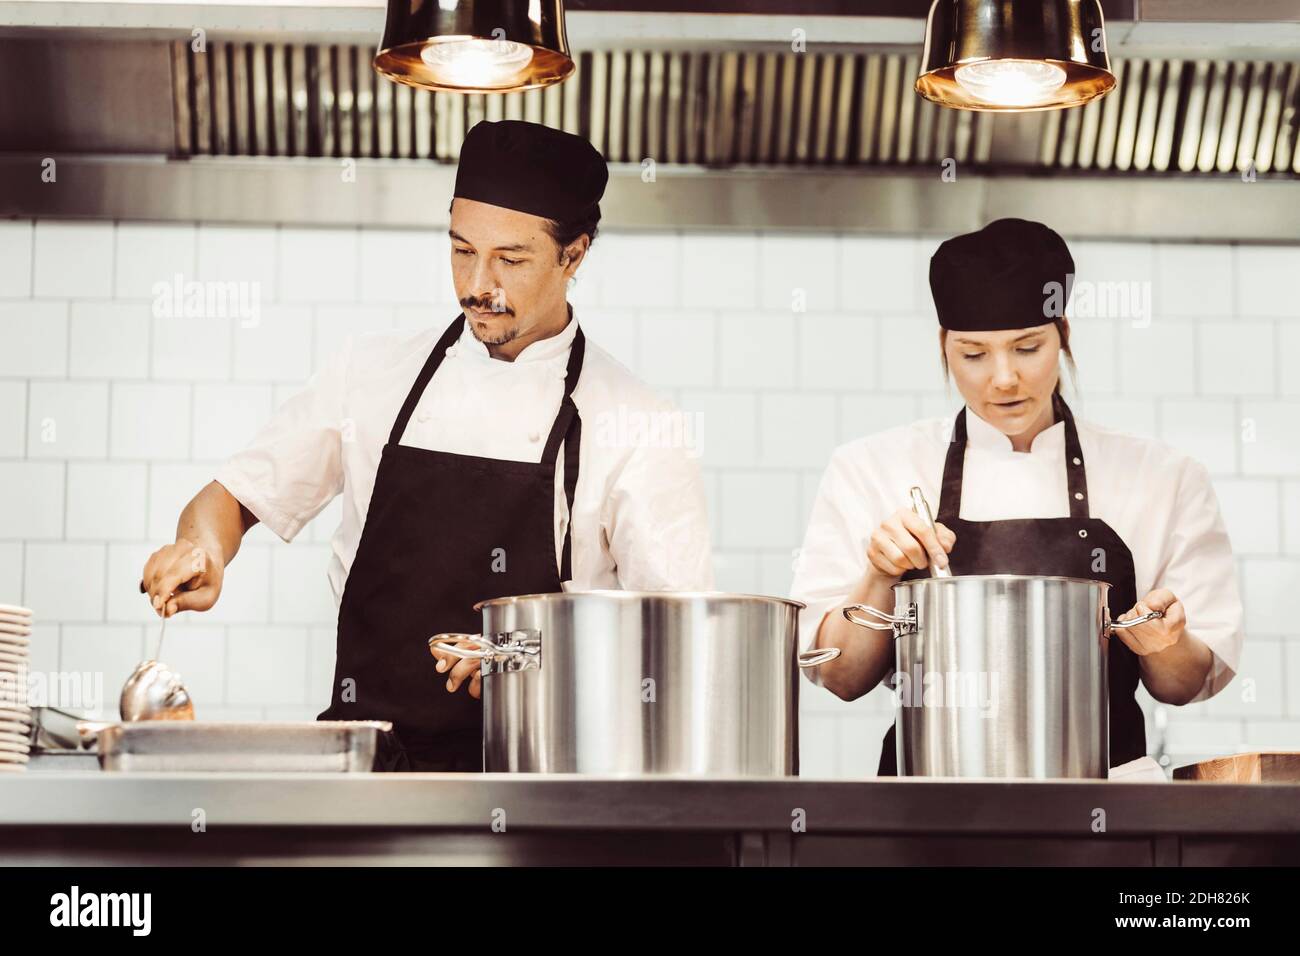 Chefs preparing food at kitchen counter Stock Photo